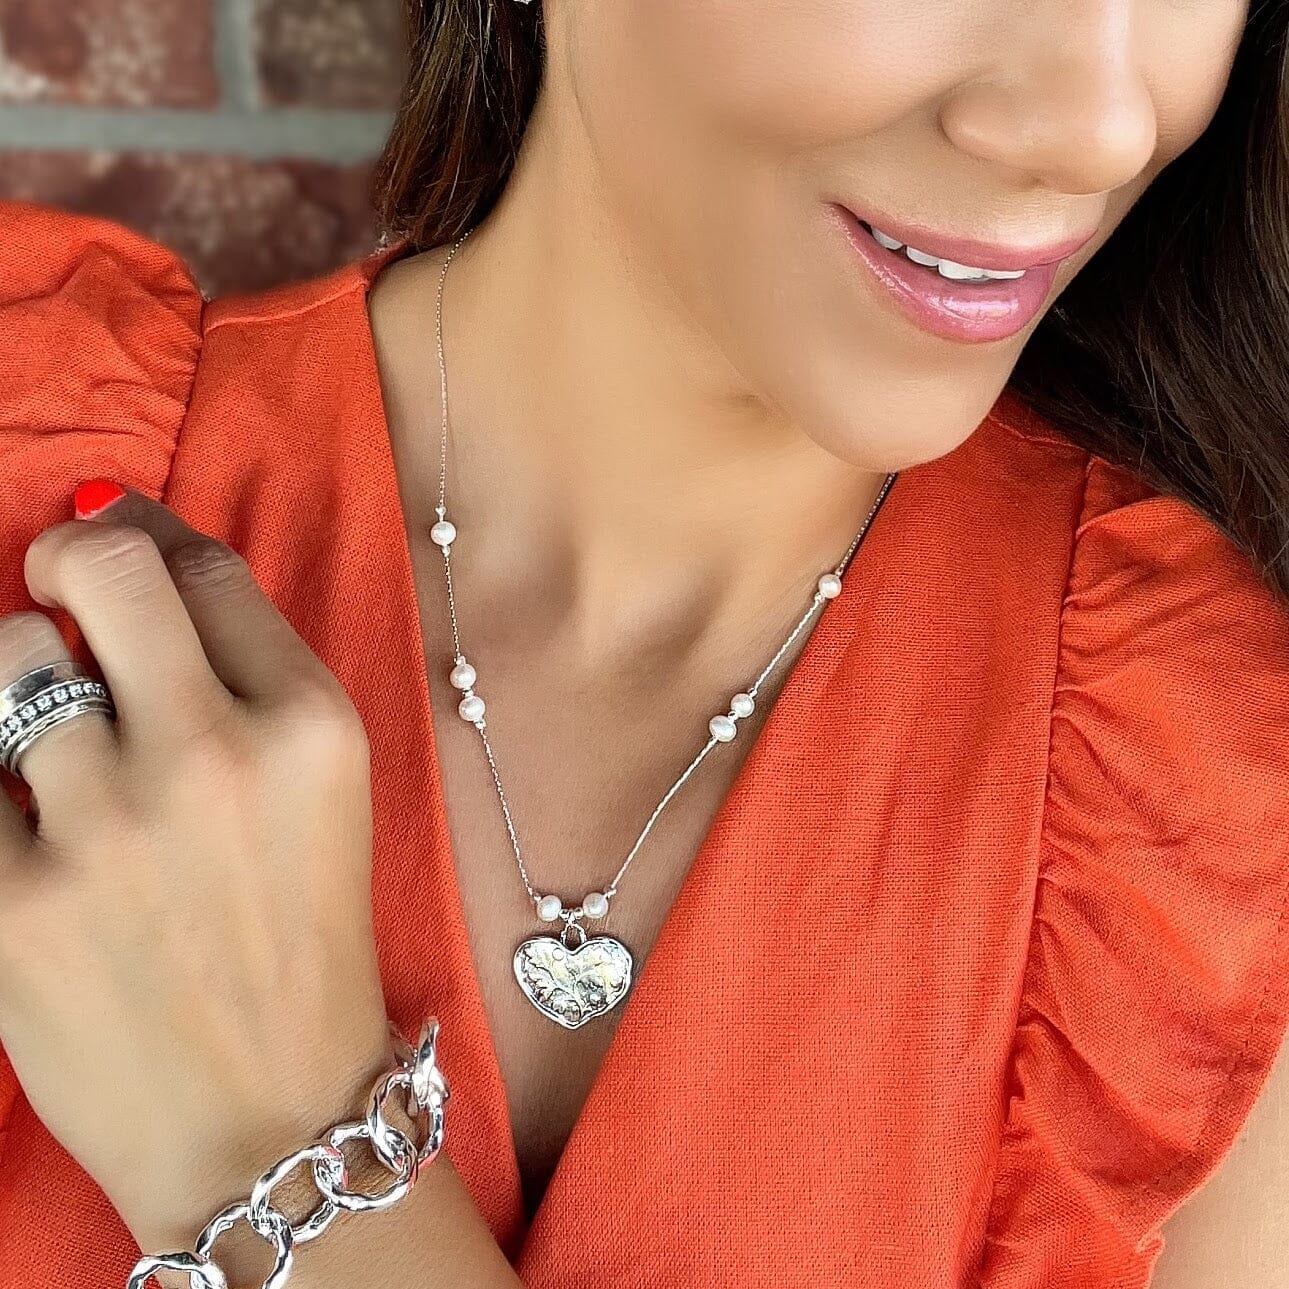 Call Me Sweetheart Necklace paired with a sterling silver & cz spinner ring and chunky silver bracelet